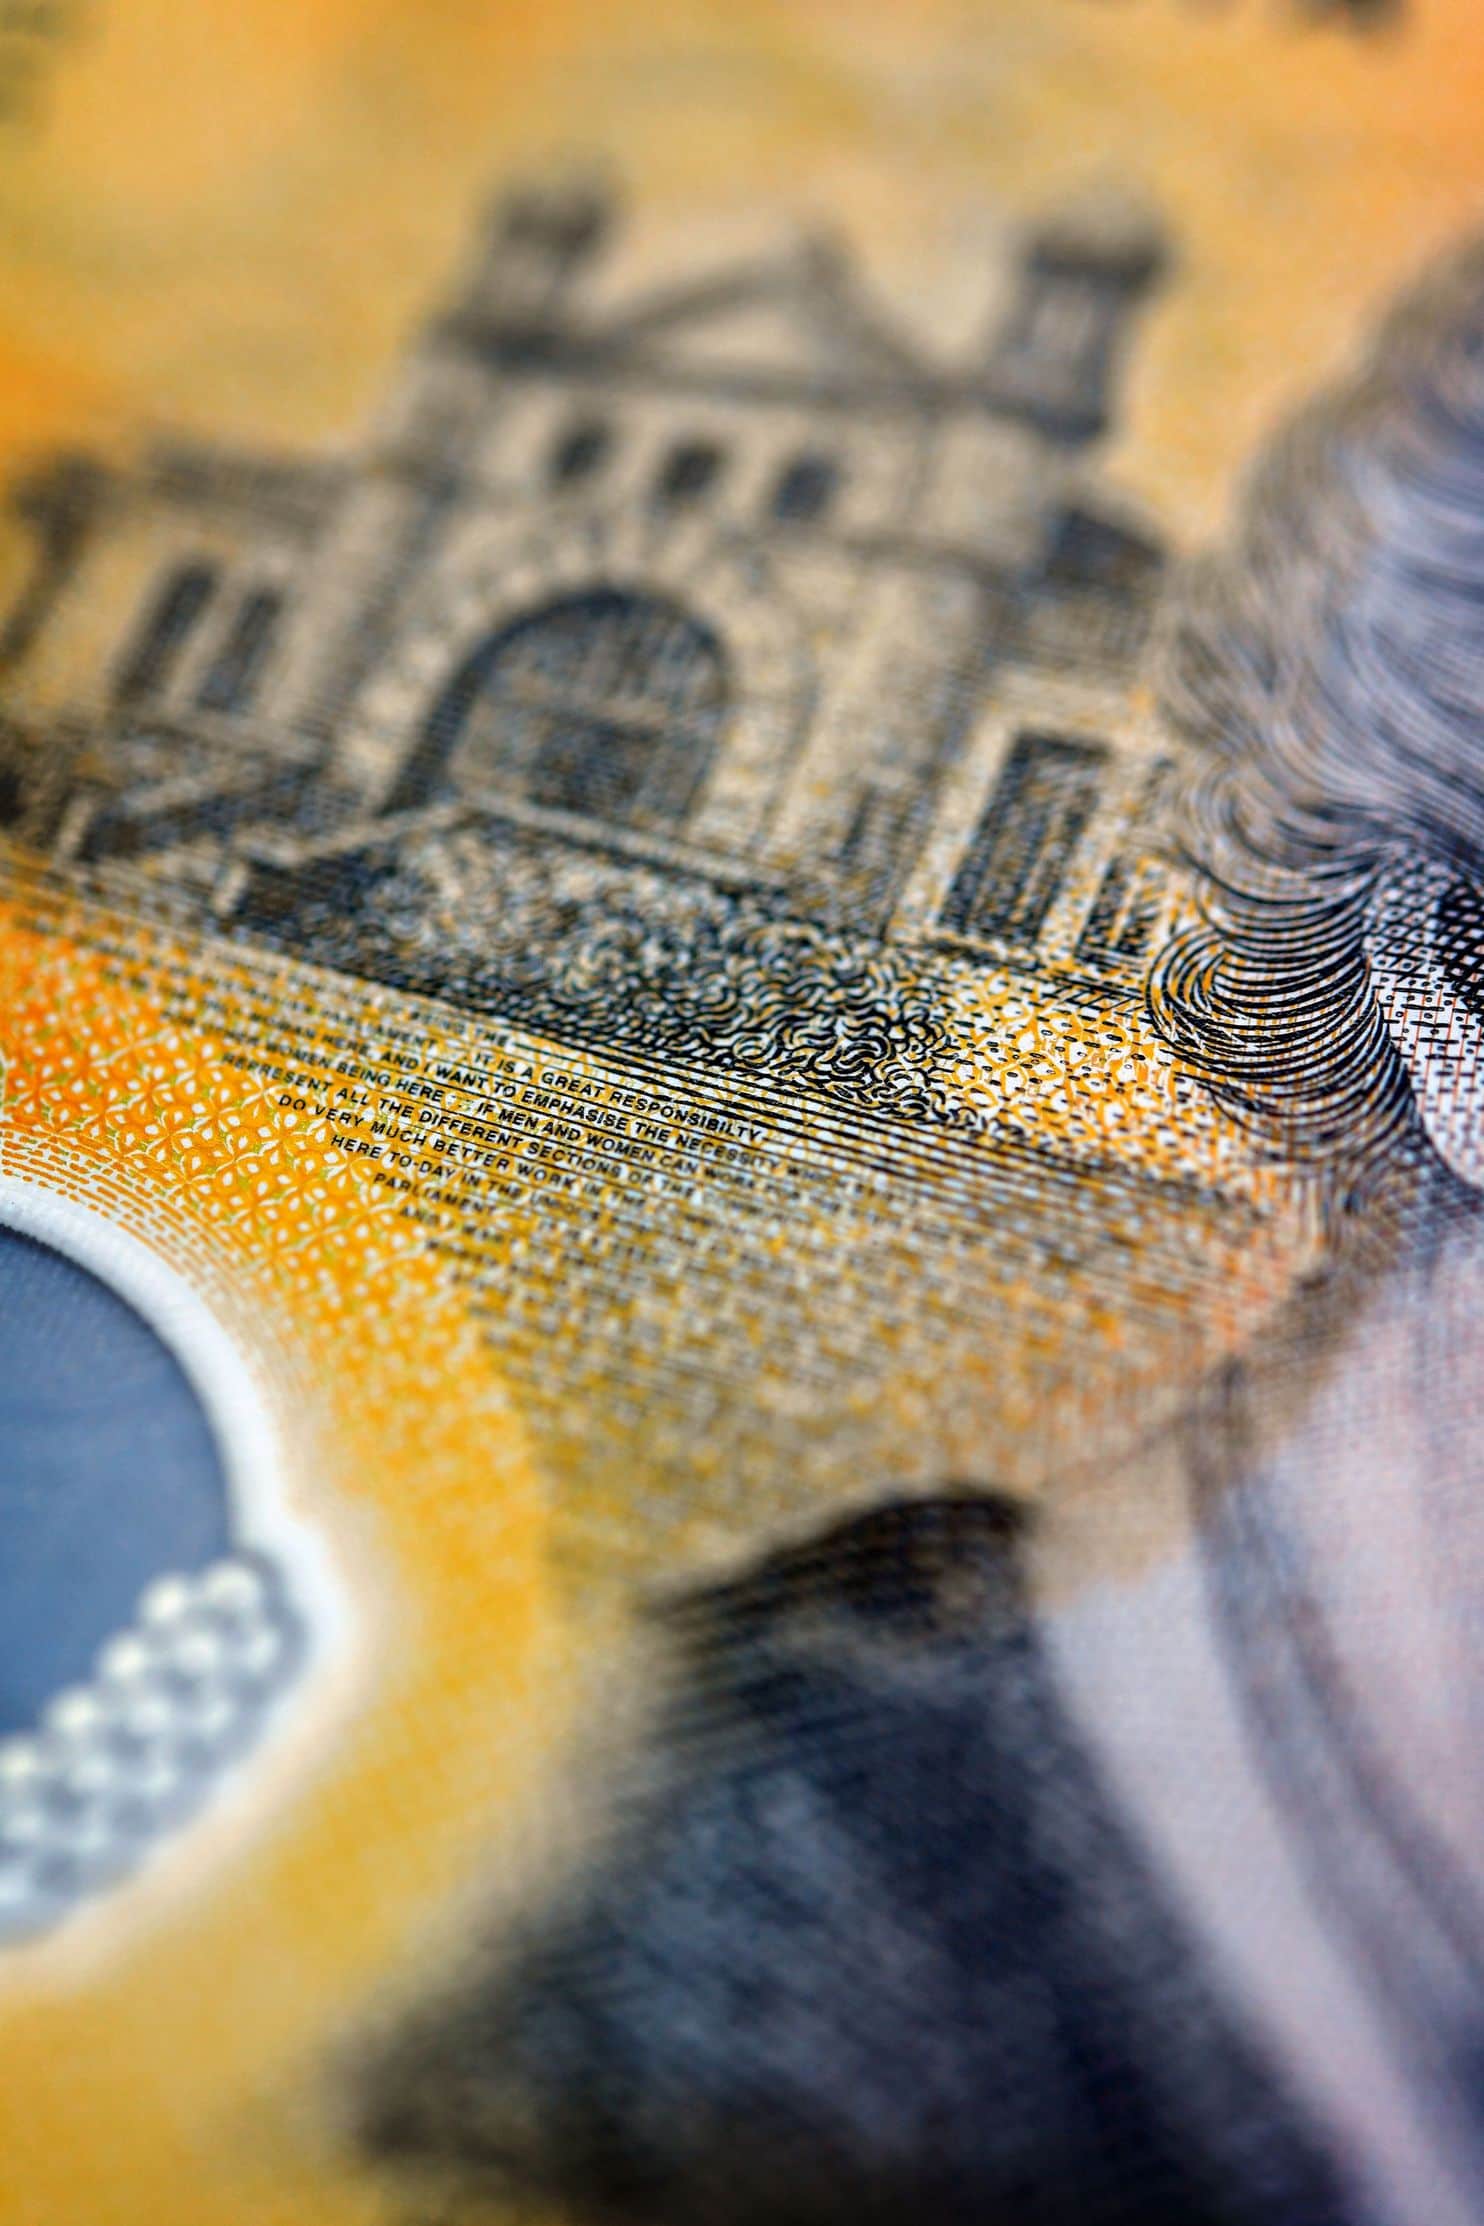 A close-up view of a current circulation 50 Australian dollar with a typo. (Dylan Coker/EPA-EFE/REX)